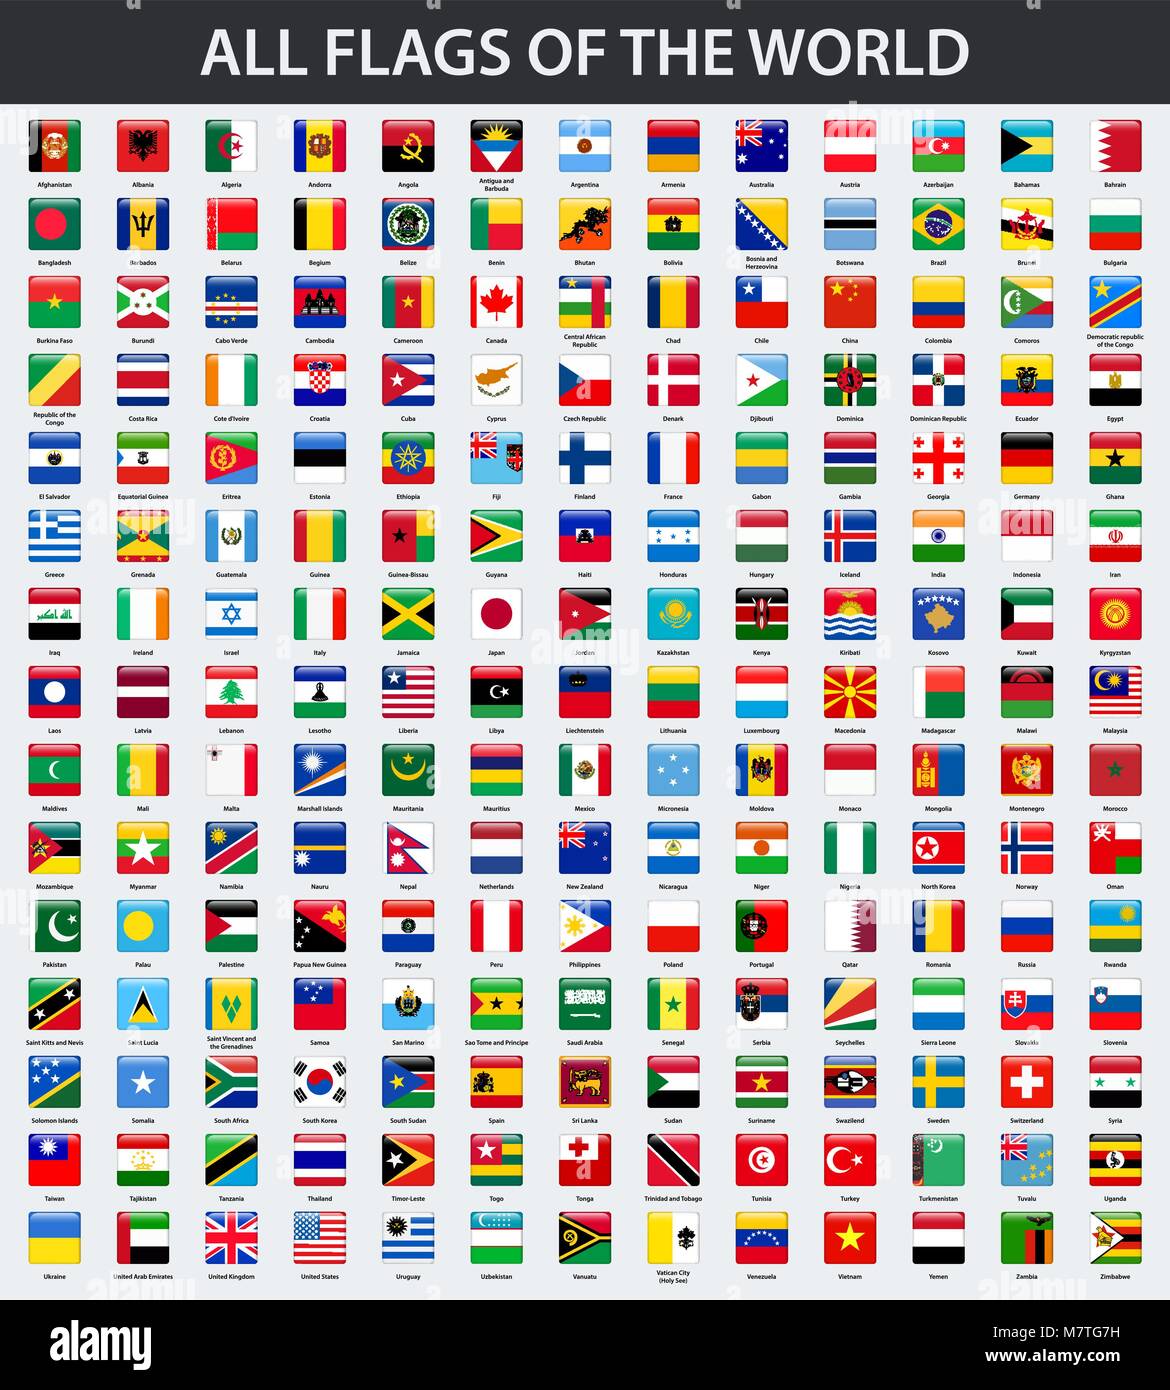 Alphabetical Order All Flags Of The World With Names - IMAGESEE